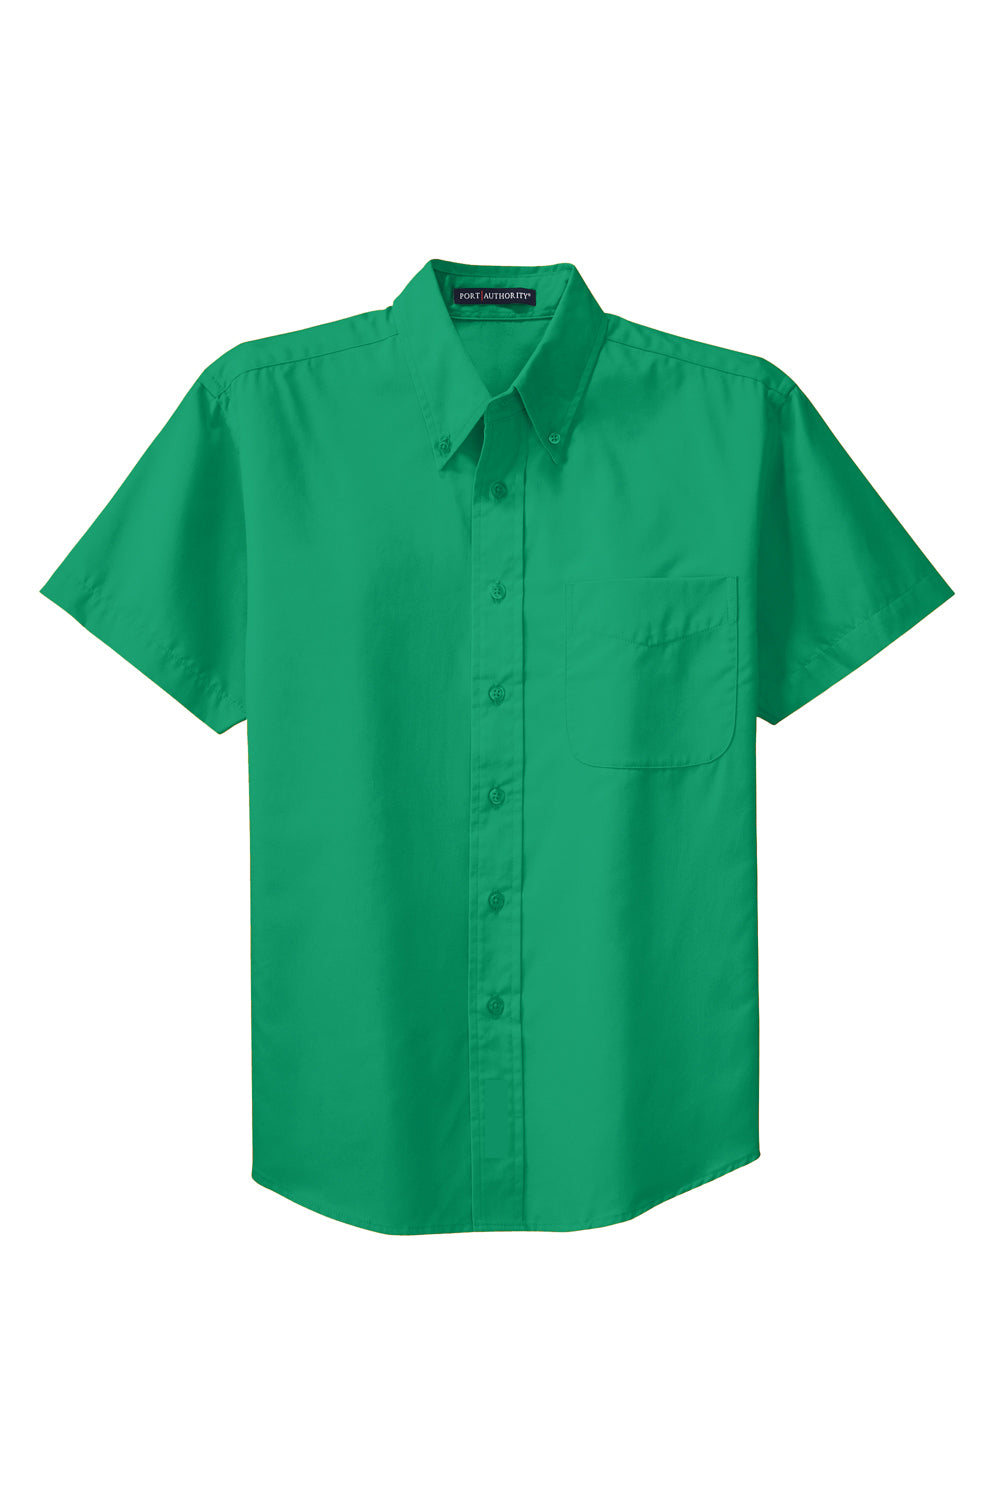 Port Authority S508/TLS508 Mens Easy Care Wrinkle Resistant Short Sleeve Button Down Shirt w/ Pocket Court Green Flat Front